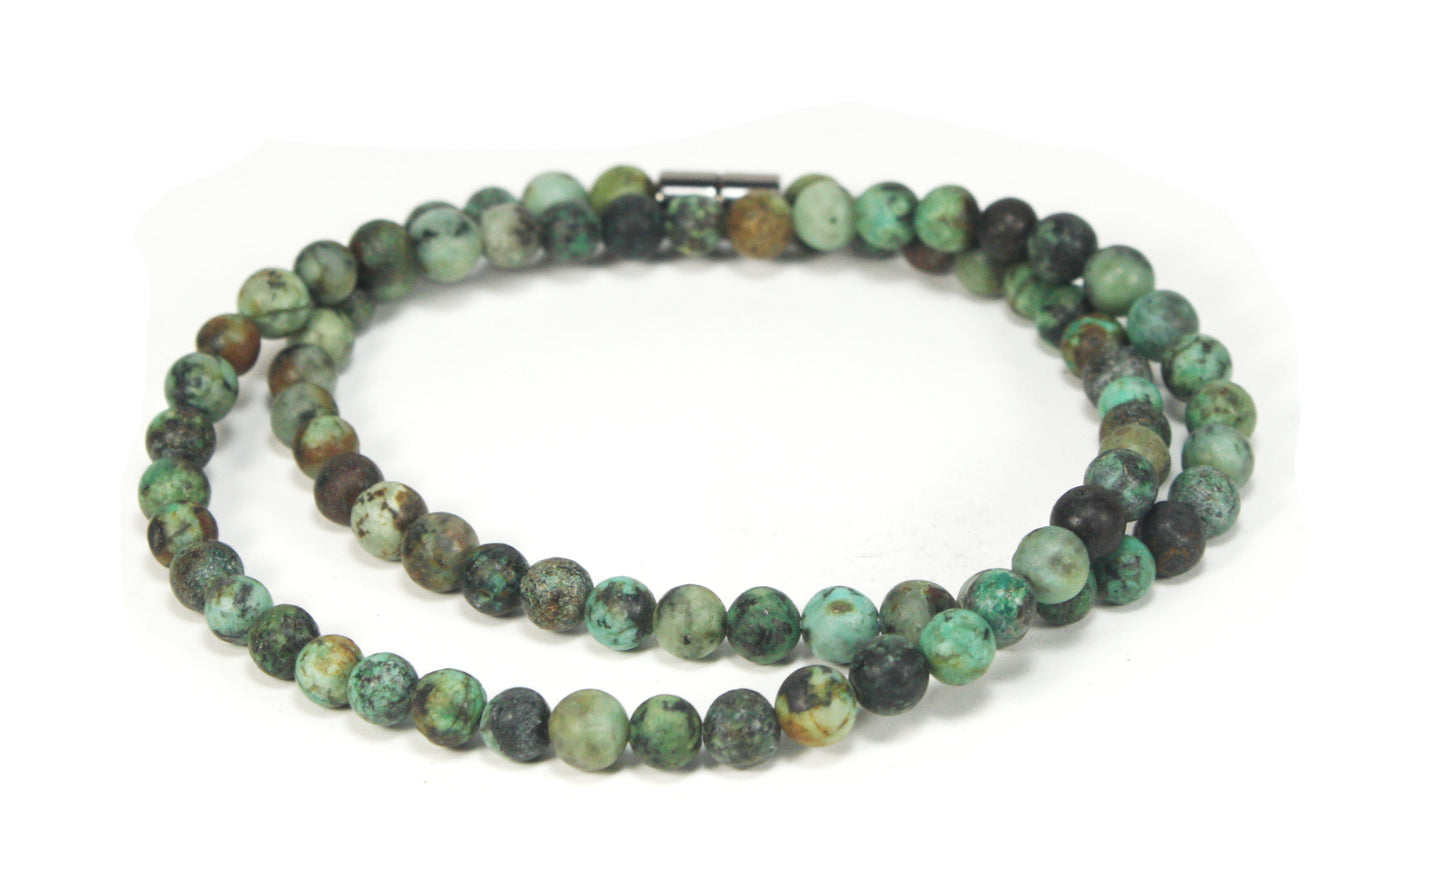 African Turquoise Necklace (6mm Small Beads)